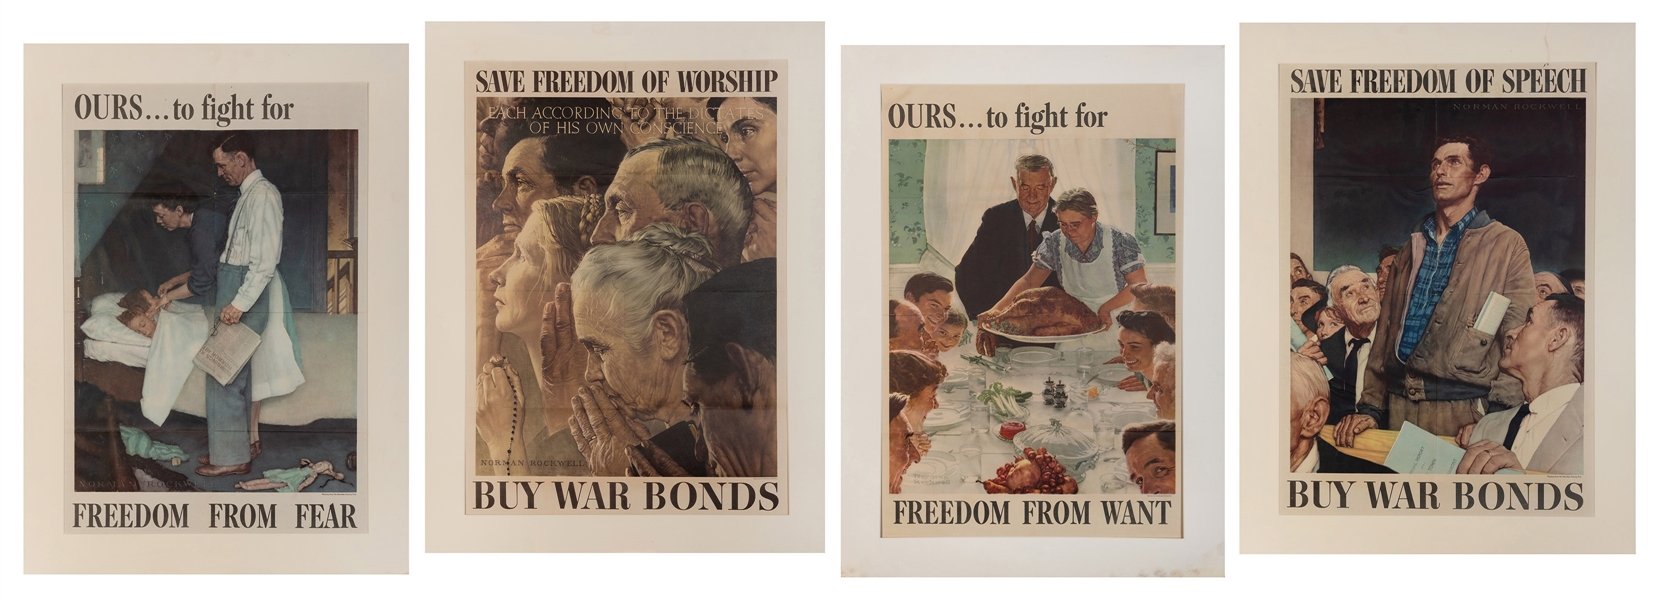  ROCKWELL, Norman (1894-1978). [The Four Freedoms]. Washingt...